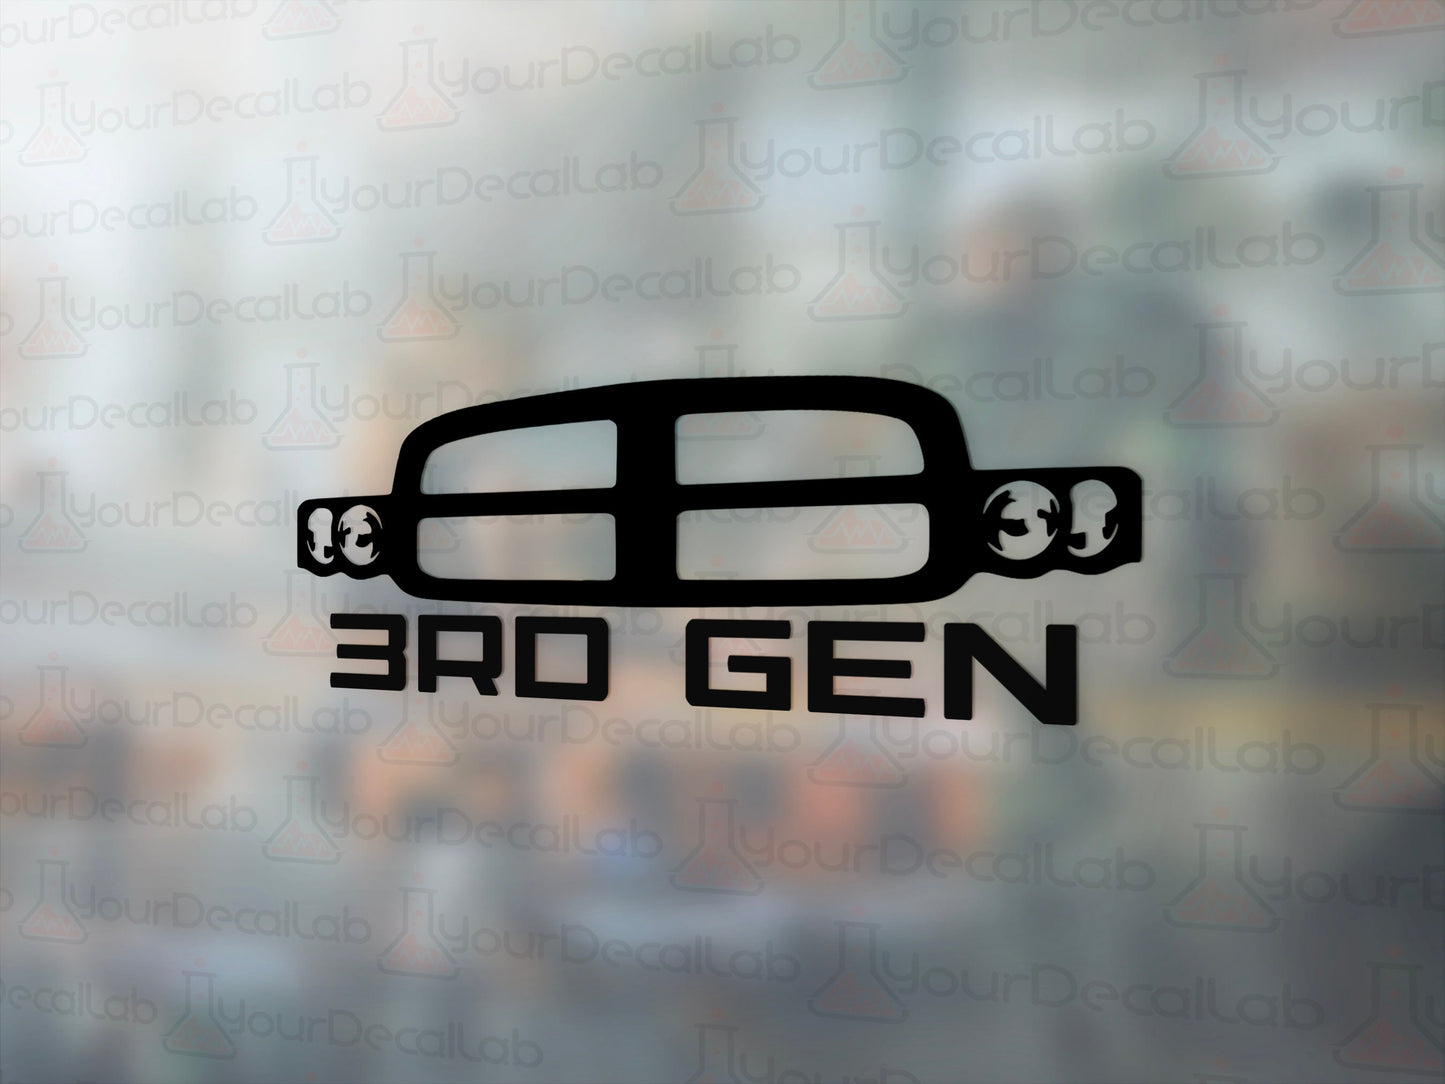 3rd Gen Grille Decal - Many Colors & Sizes